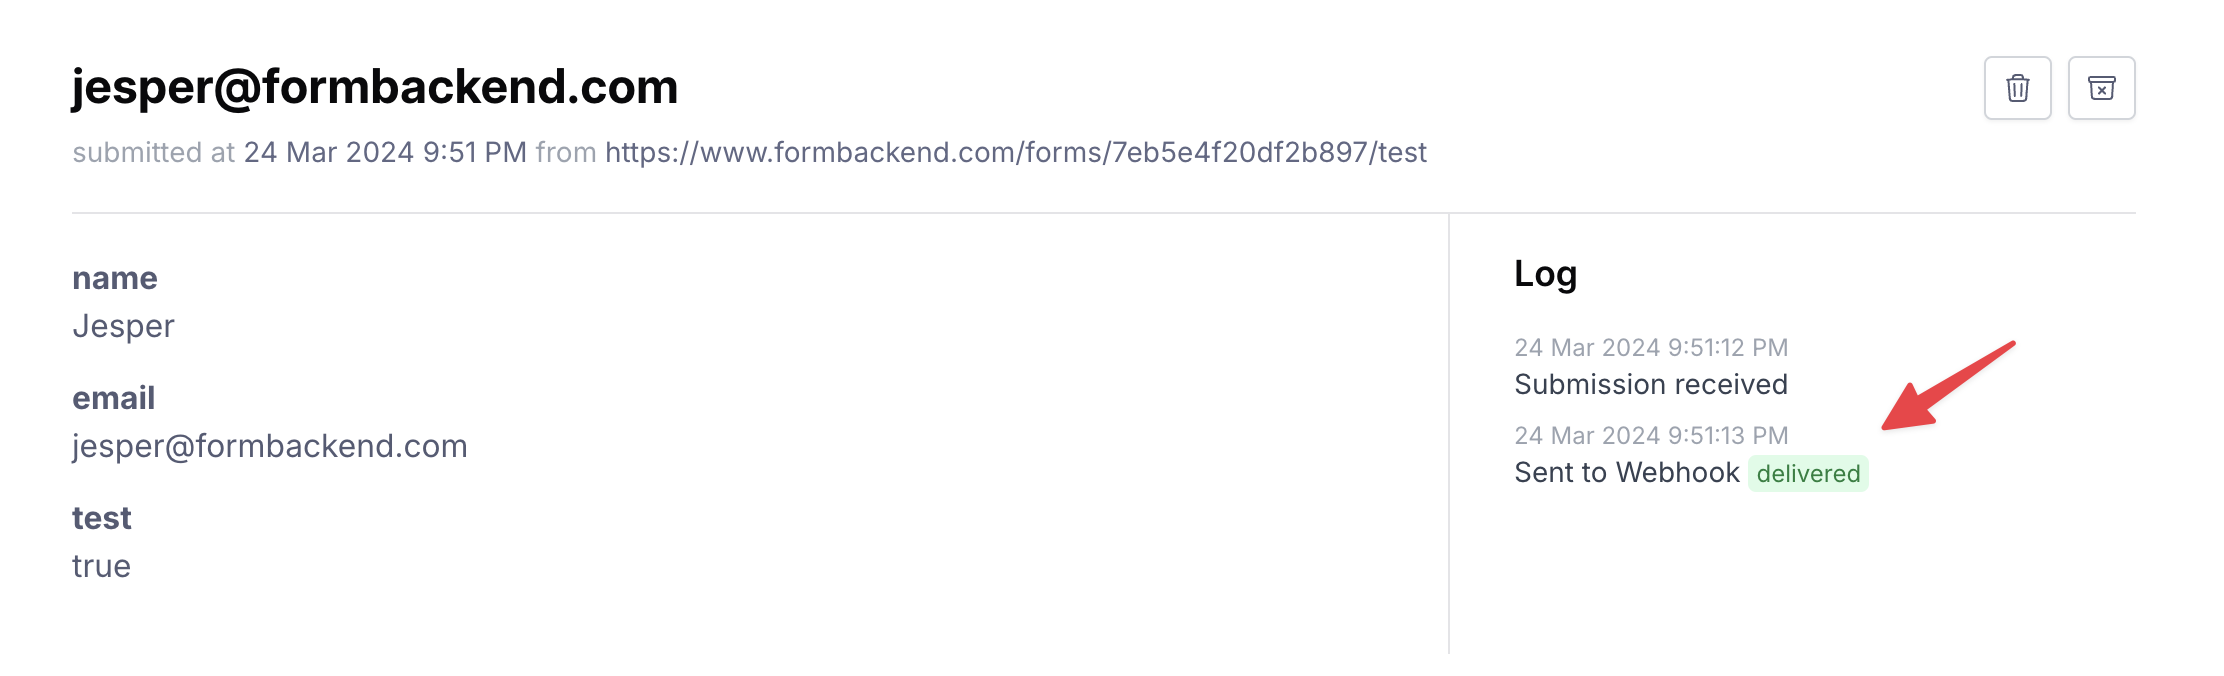 Submission log entry showing it was sent to the webhook